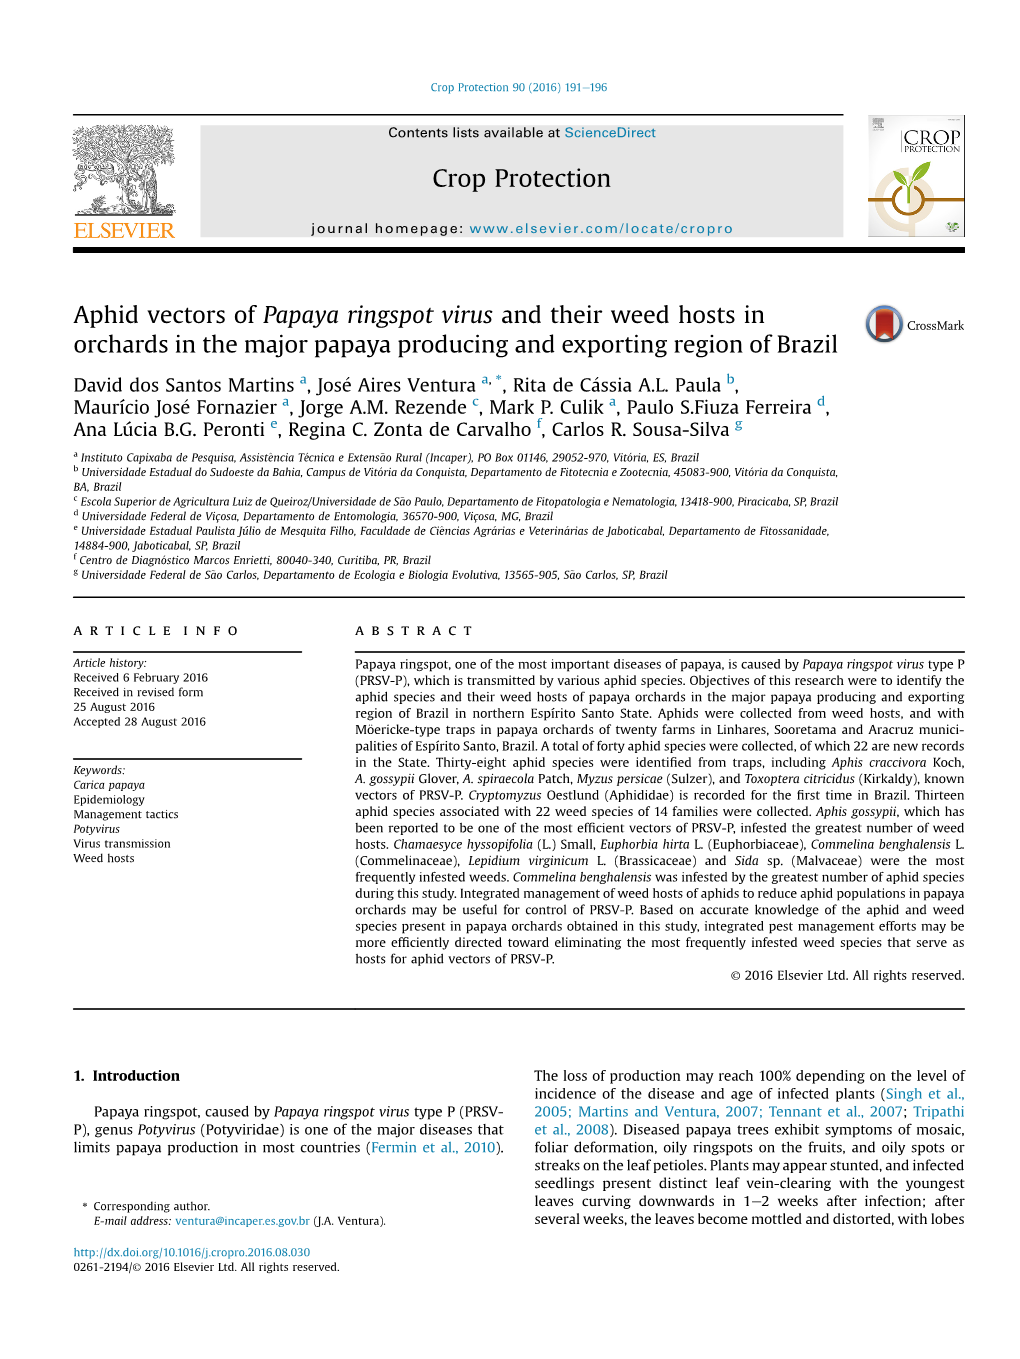 Aphid Vectors of Papaya Ringspot Virus and Their Weed Hosts in Orchards in the Major Papaya Producing and Exporting Region of Brazil